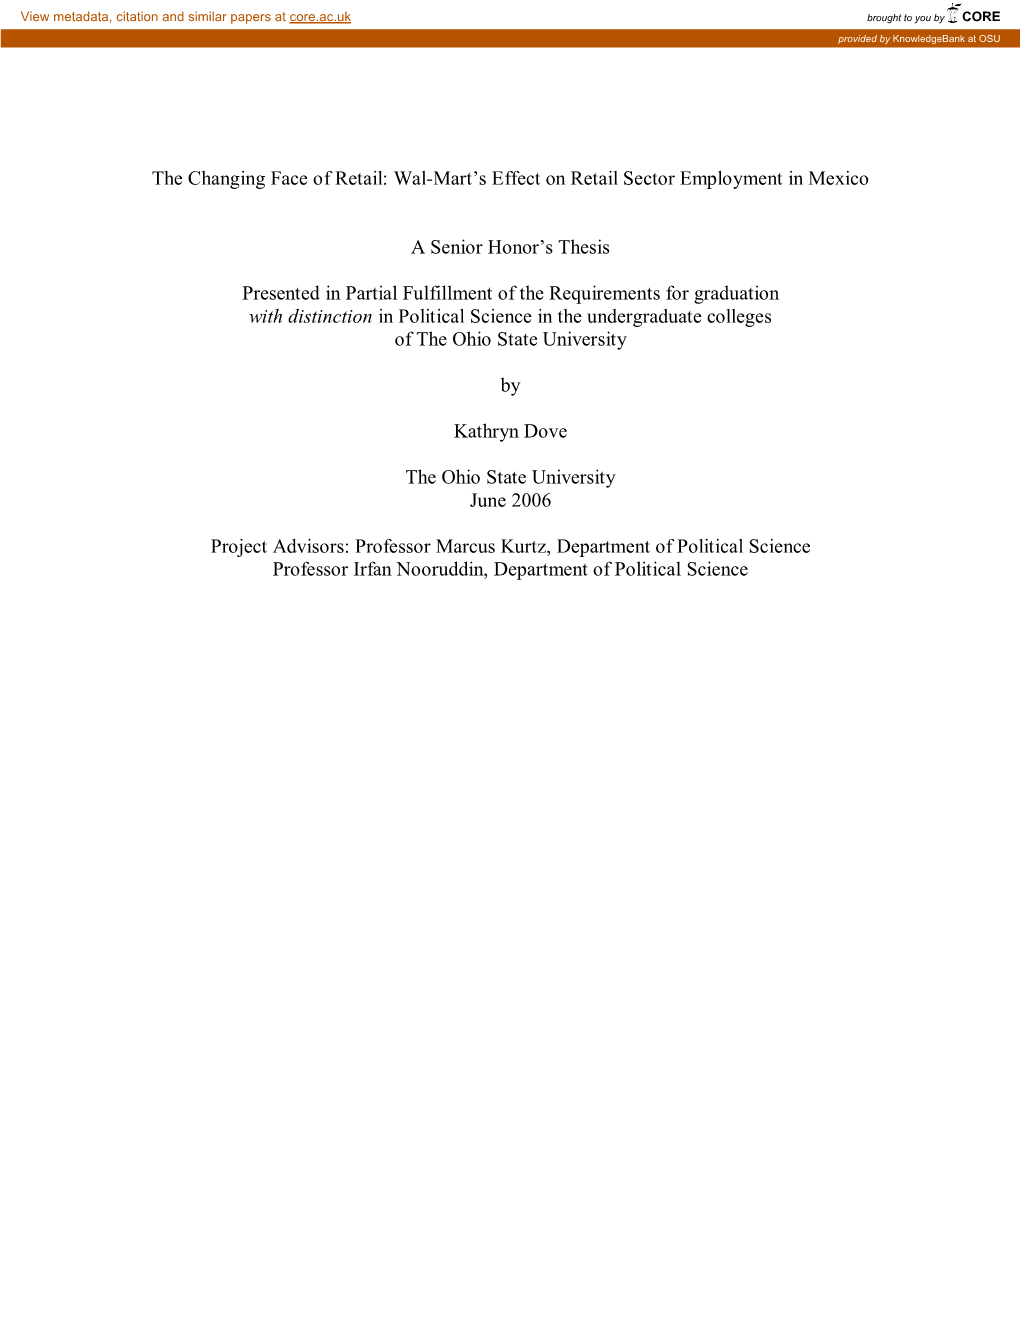 Wal-Mart's Effect on Retail Sector Employment in Mexico a Senior Honor's Thesis Presented in Pa